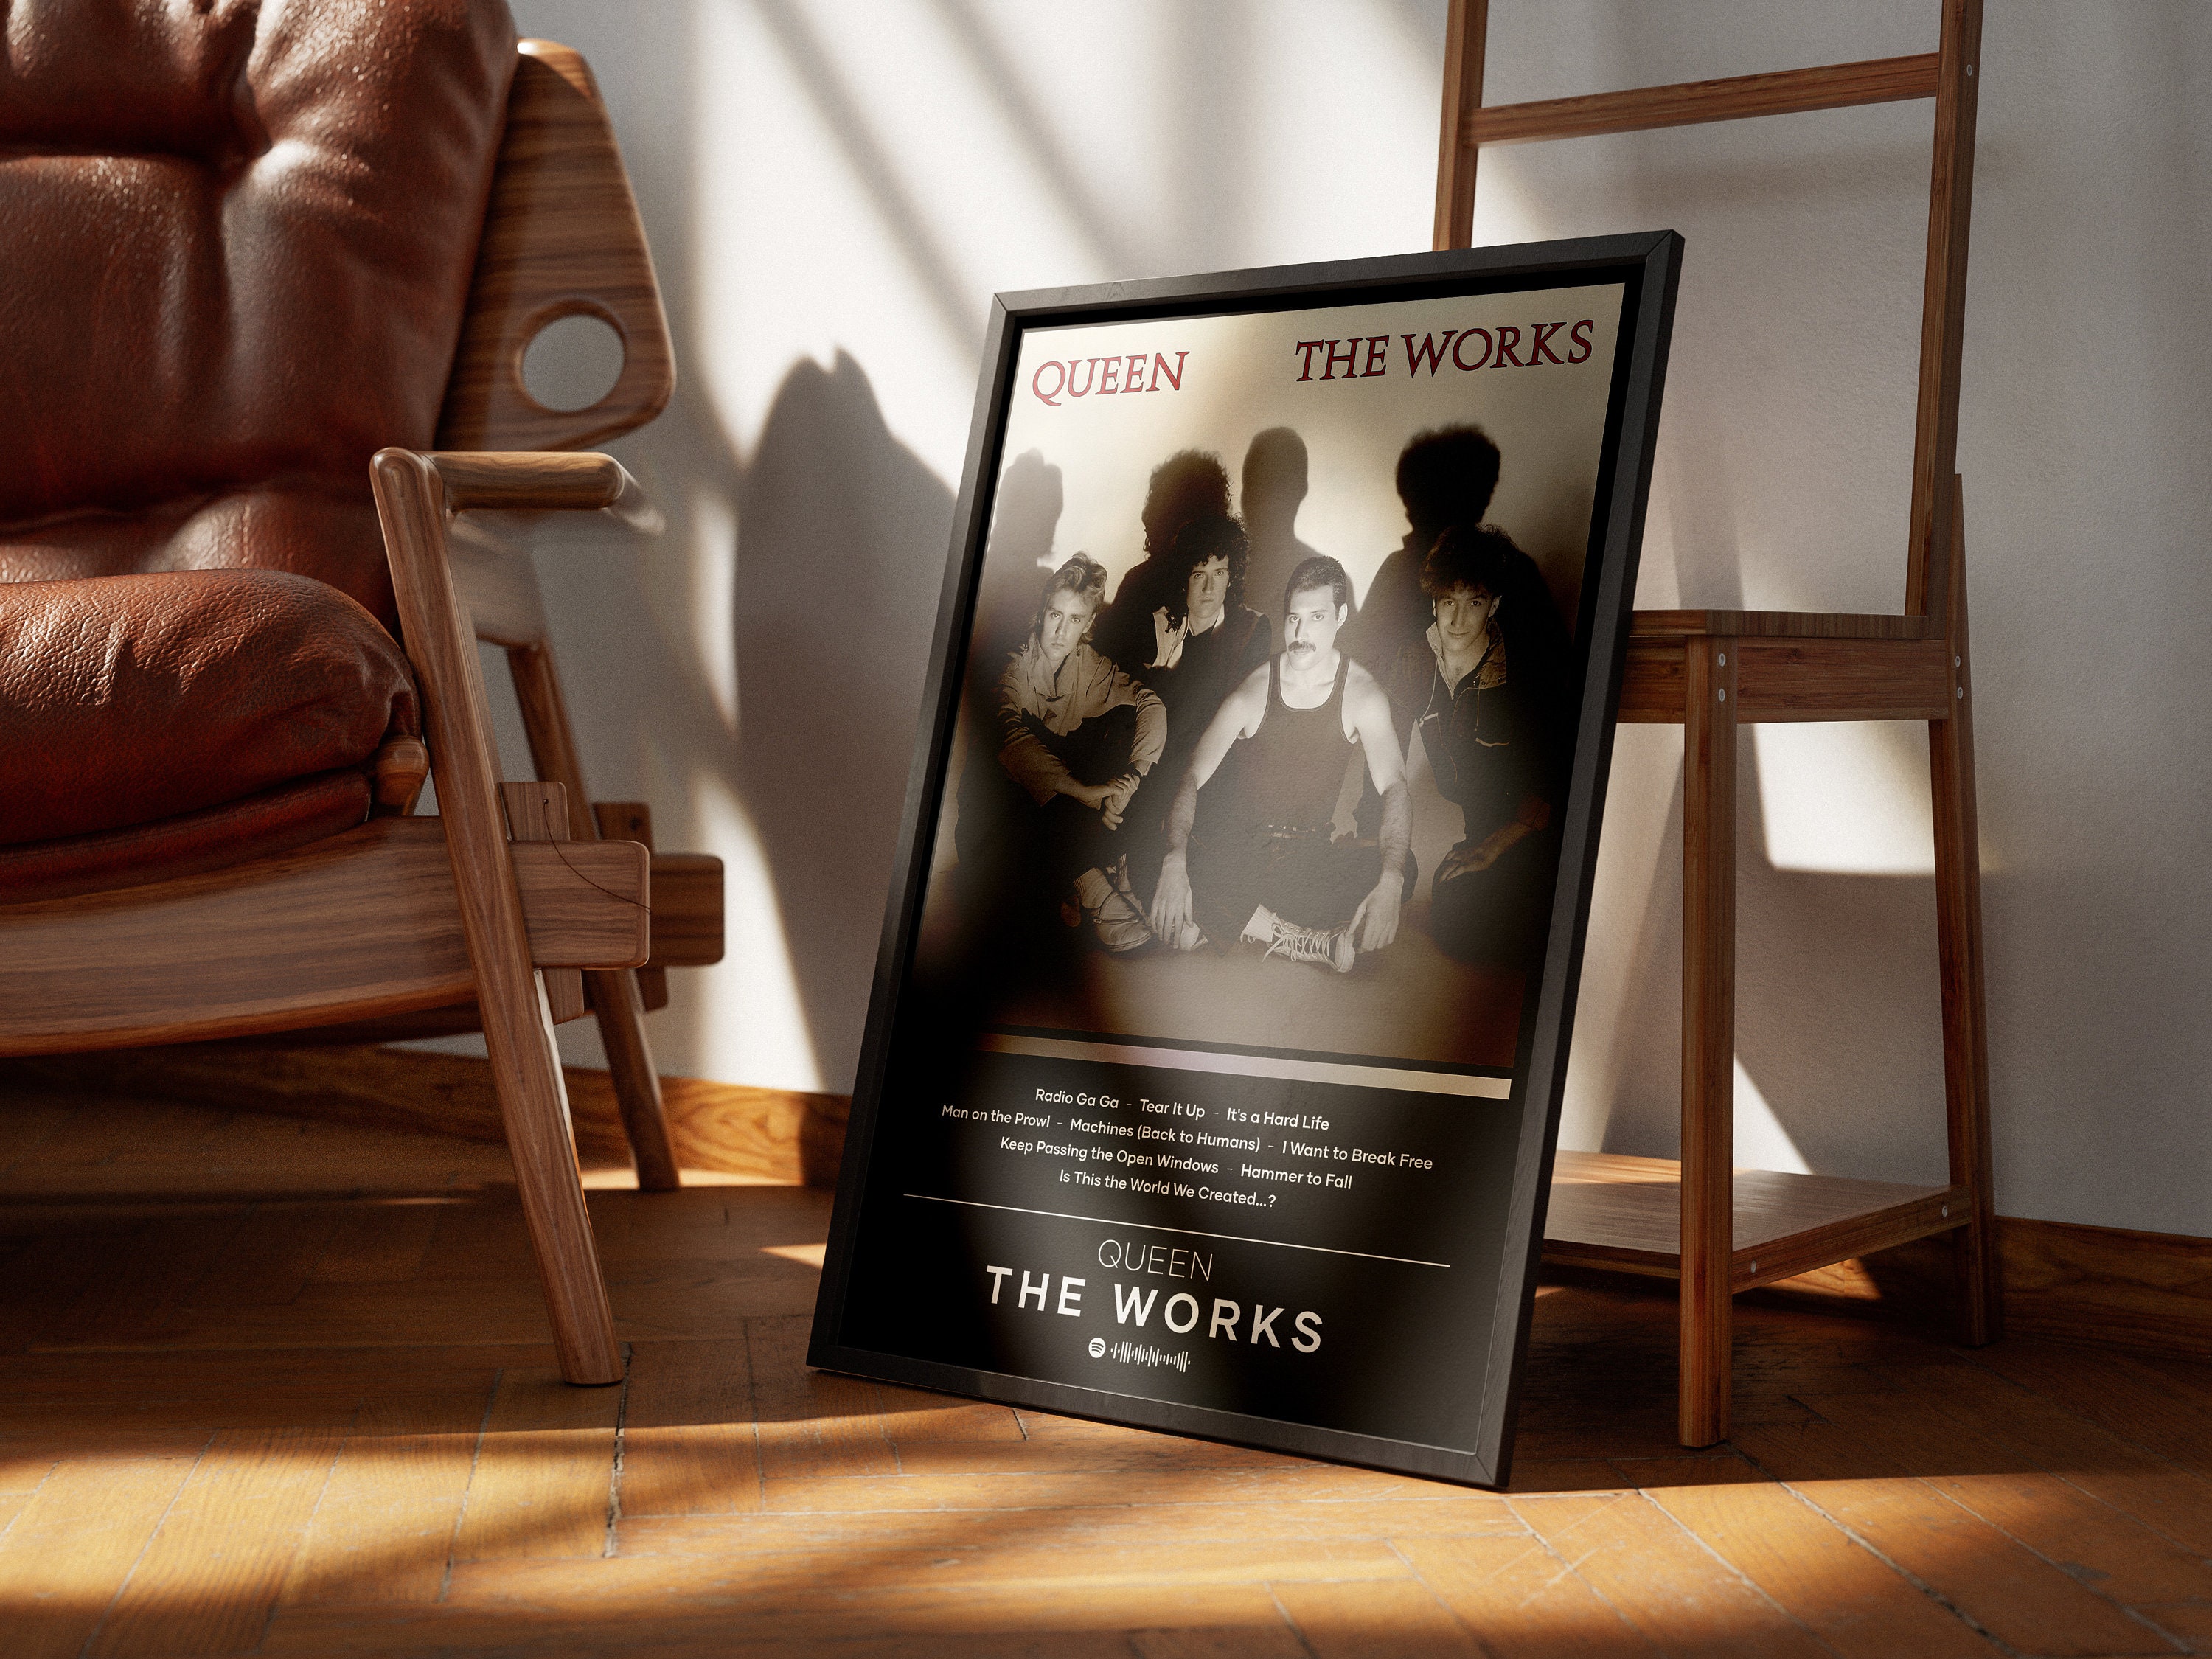 Queen Poster | The Works Poster | Album Poster Print